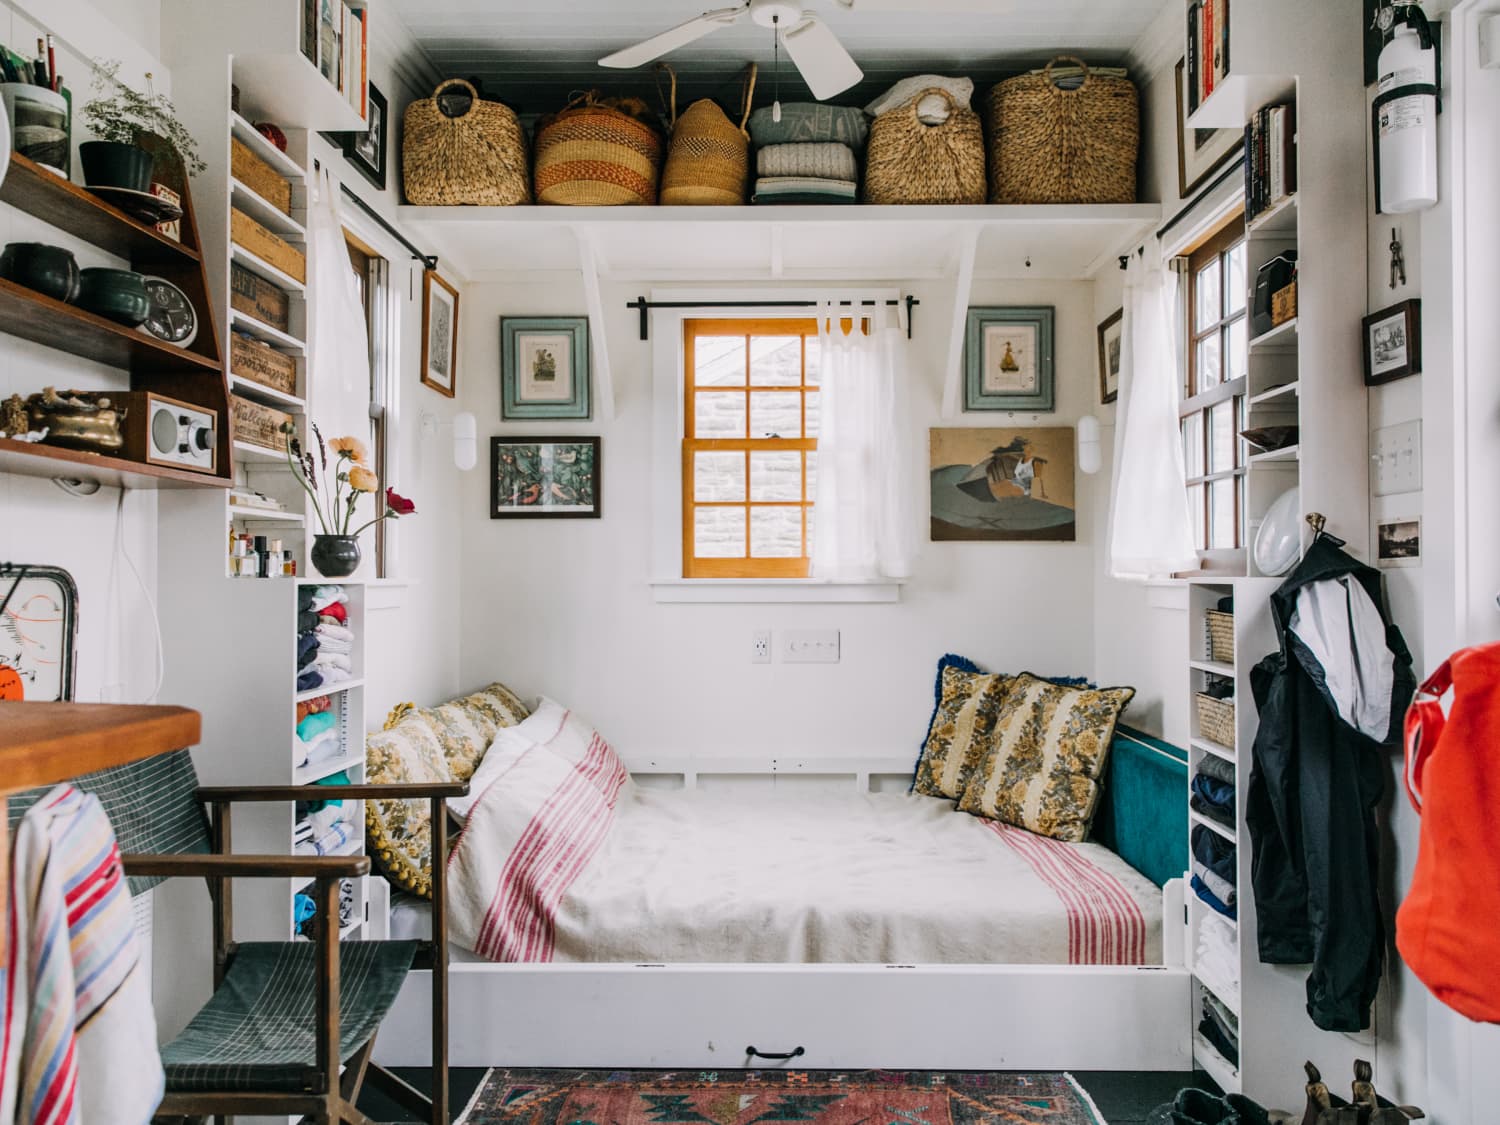 The Best Tiny Homes on Instagram   Tiny Home Design   Apartment ...